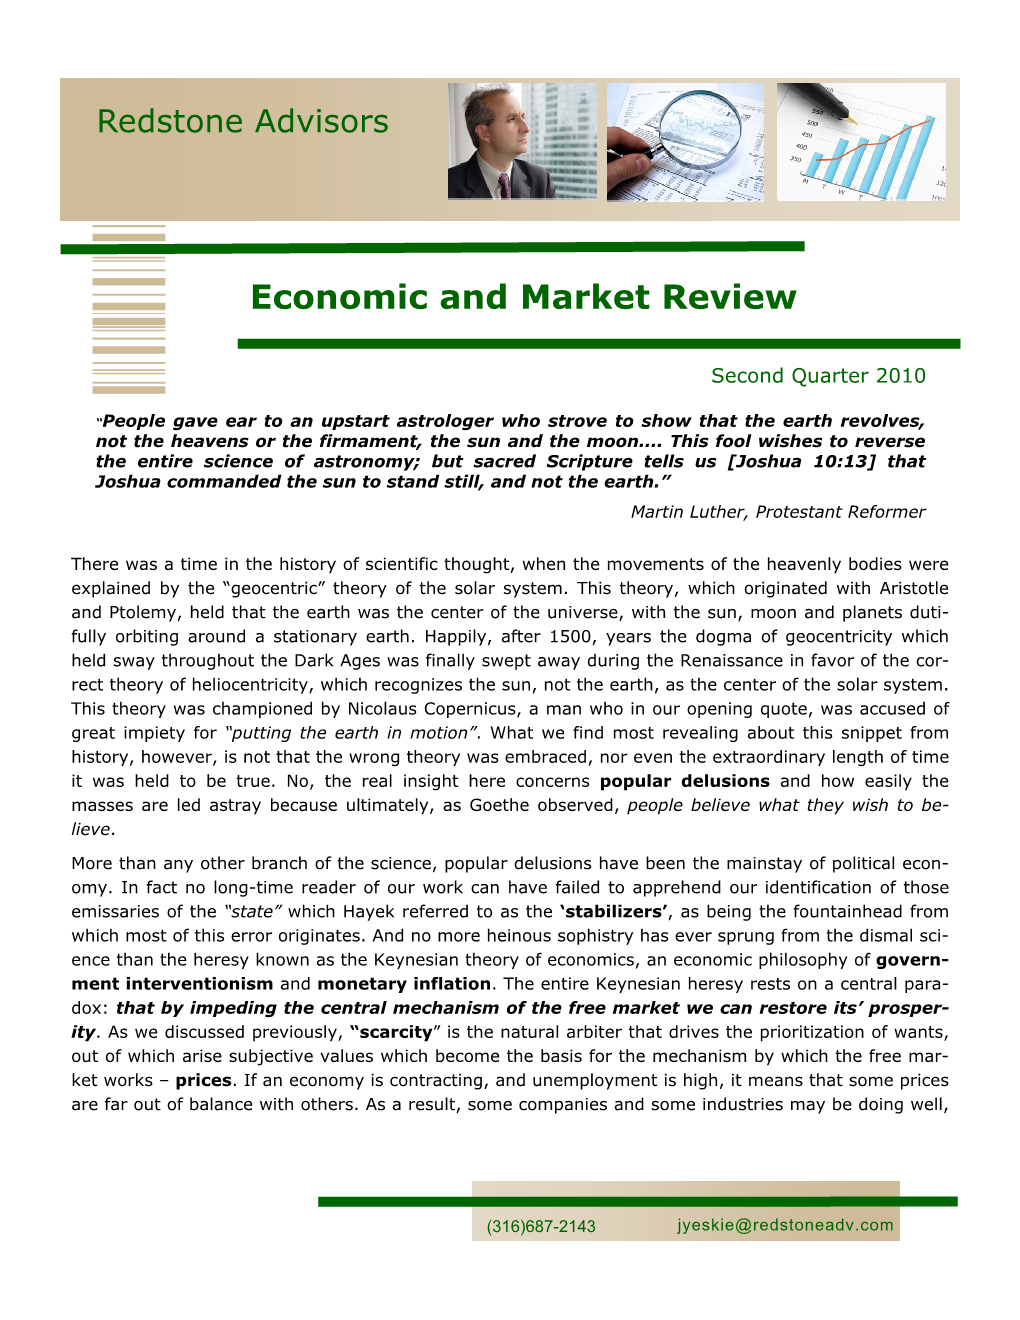 Economic and Market Review